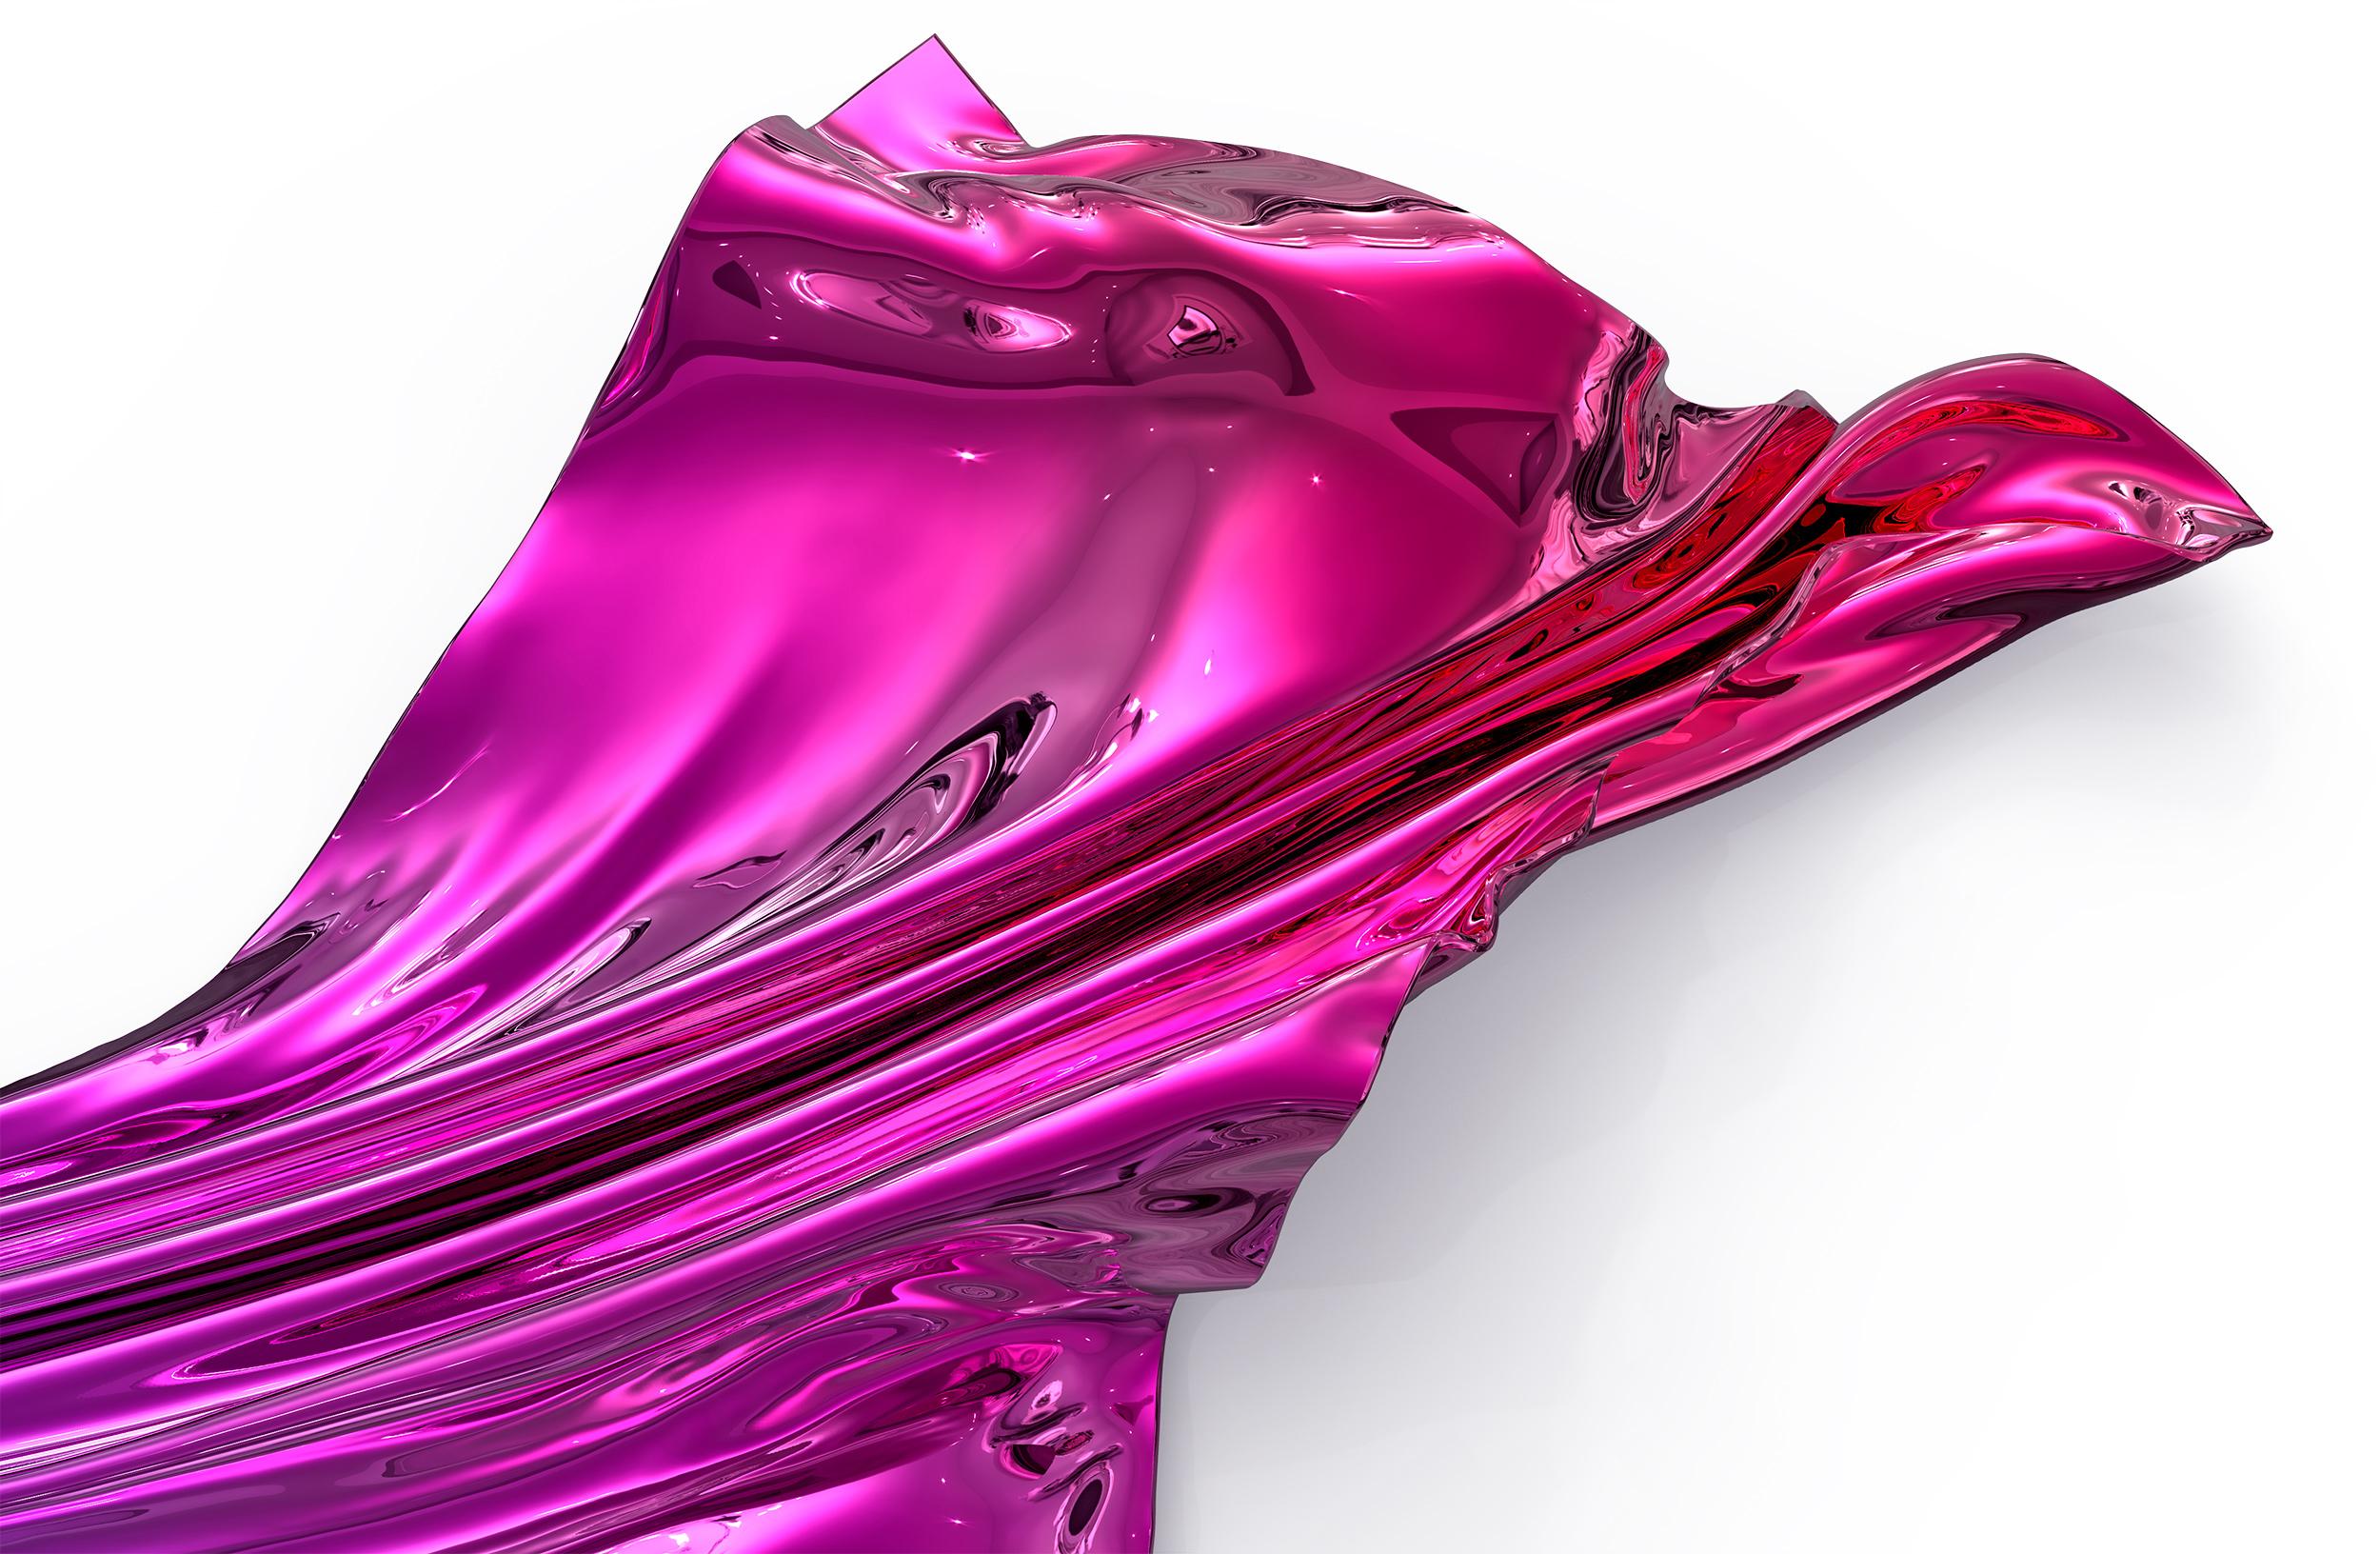 The Levitaz Wind Panel 06 exudes dynamism and fluidity, as if capturing the ephemeral dance of wind in a solid form. Its vibrant magenta to blue hue fade, applied through a meticulous chroming process, seems to shift with the light, creating an